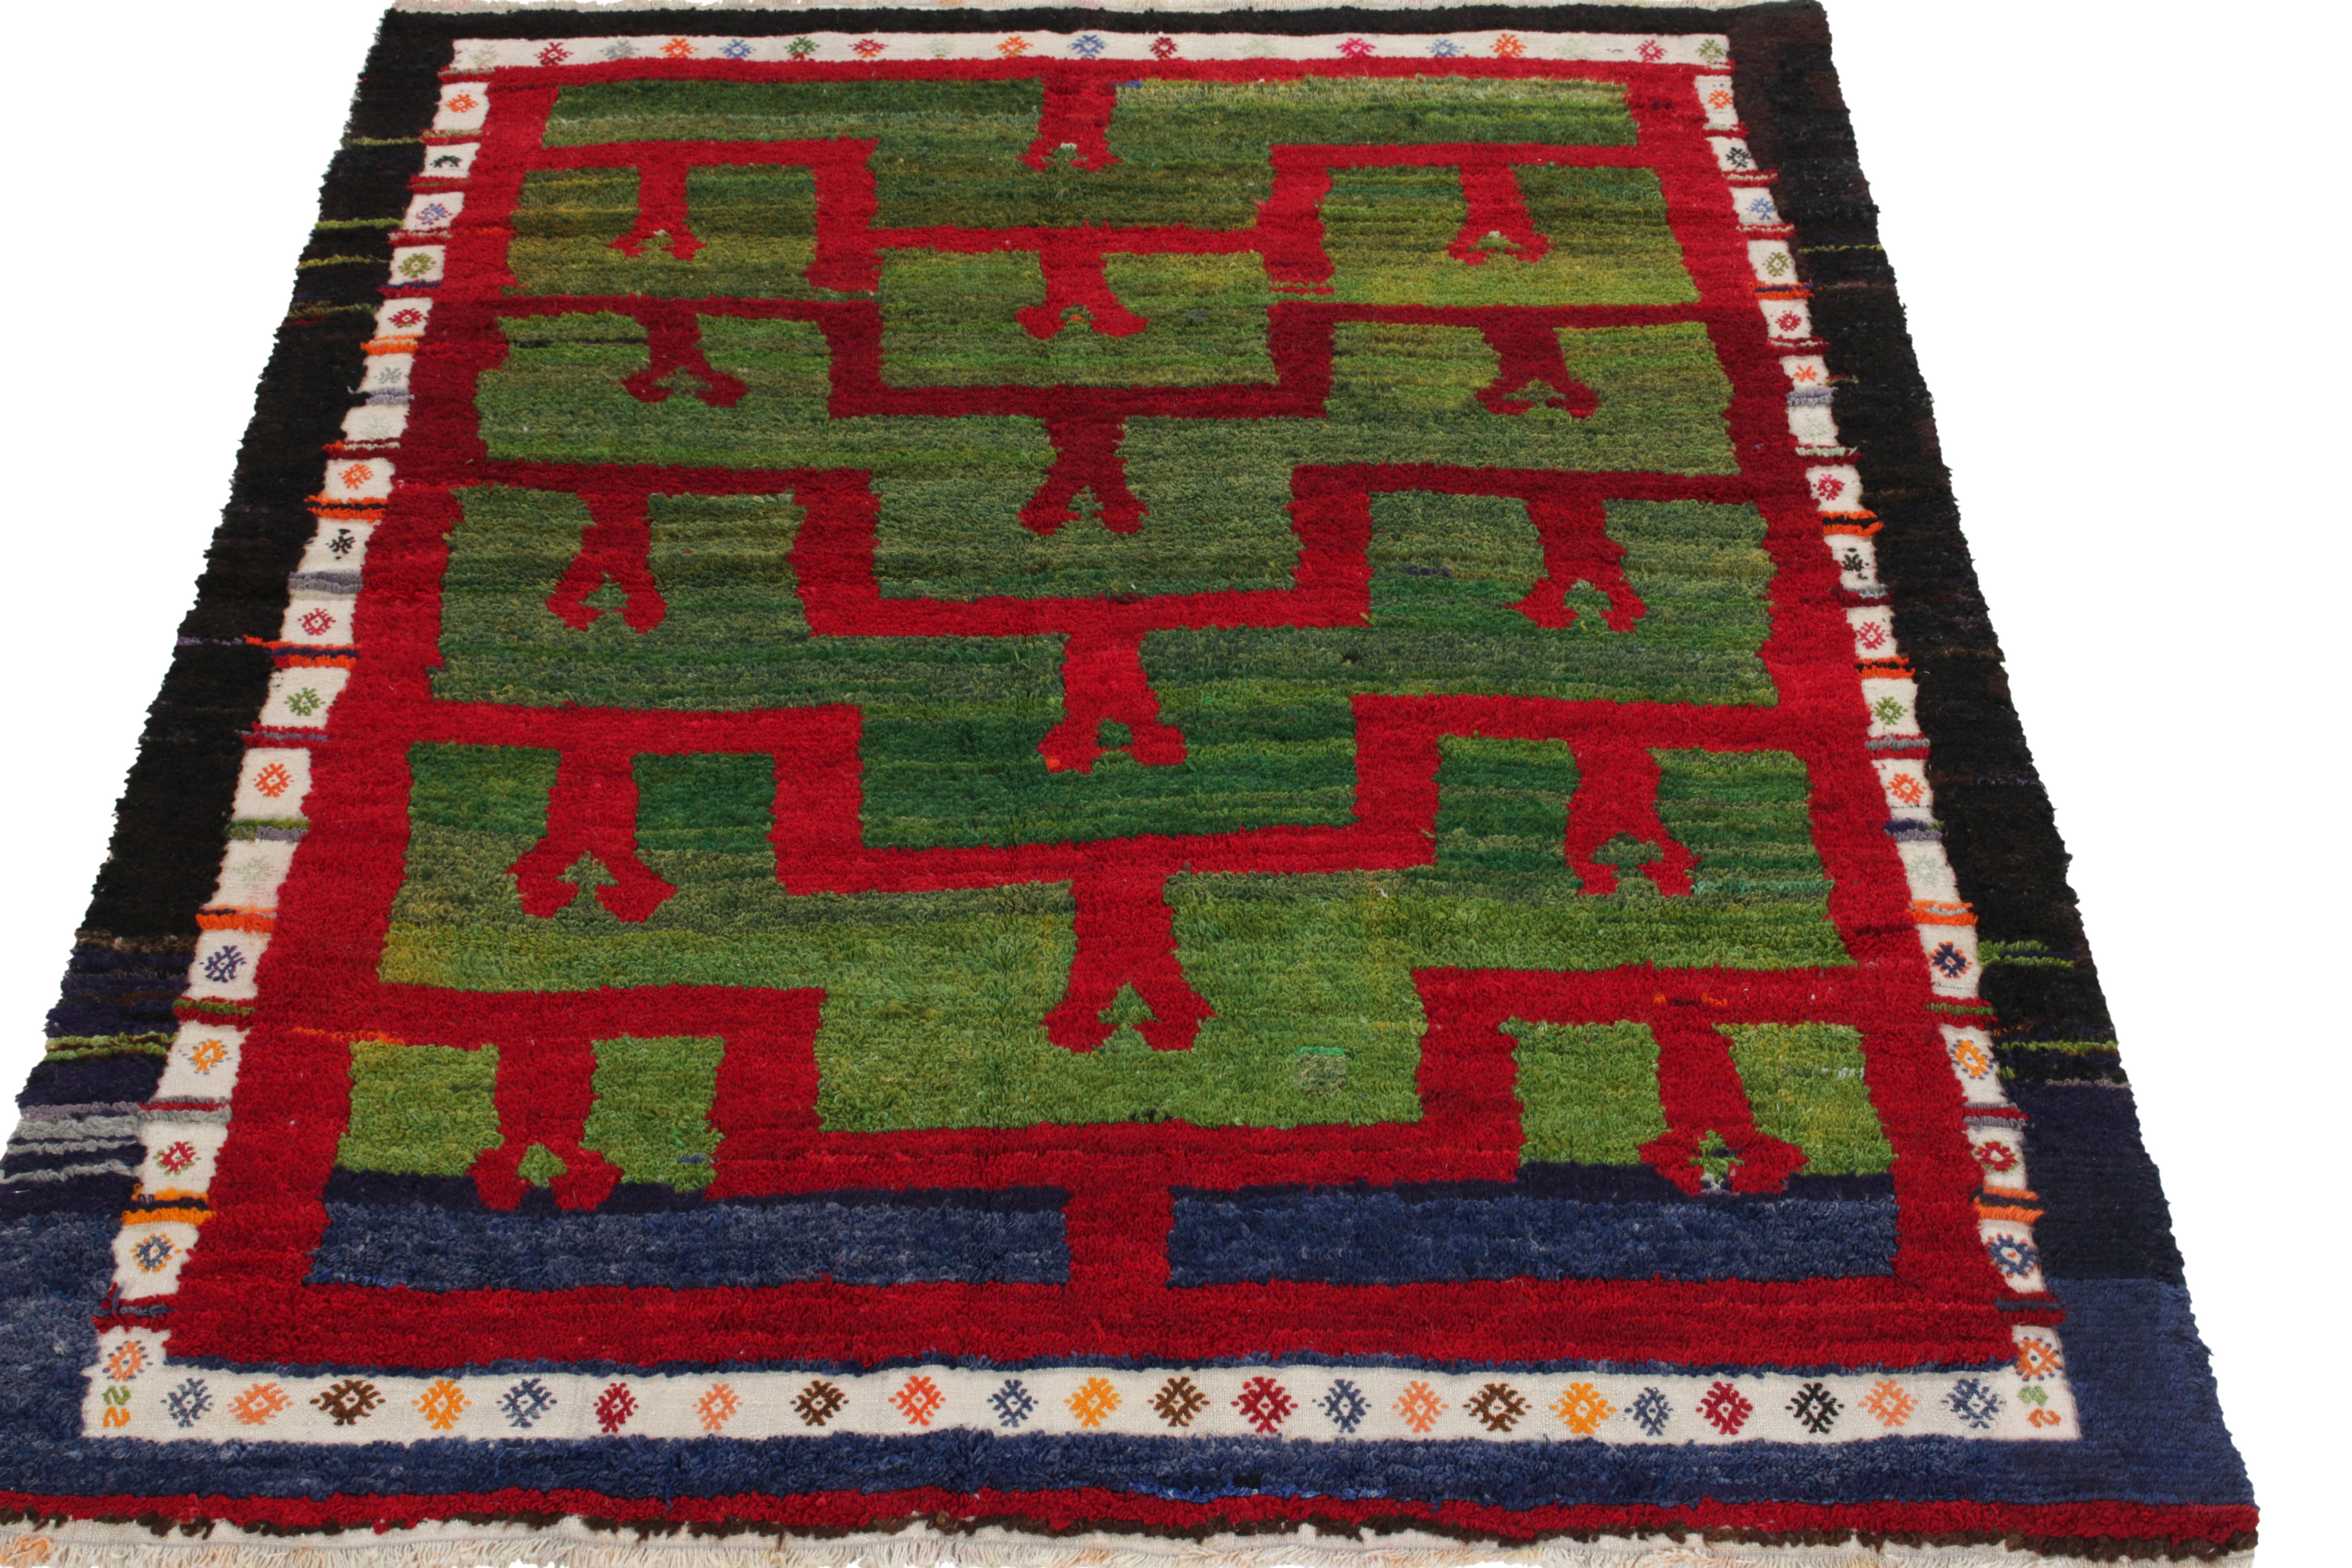 Hand-knotted in wool from Turkey circa 1950-1960, a vintage 5x6 Tulu rug from our Antique & Vintage collection celebrating the period style through a symmetric geometric pattern—bold red tones in play with striated green hues, enfolded in a white